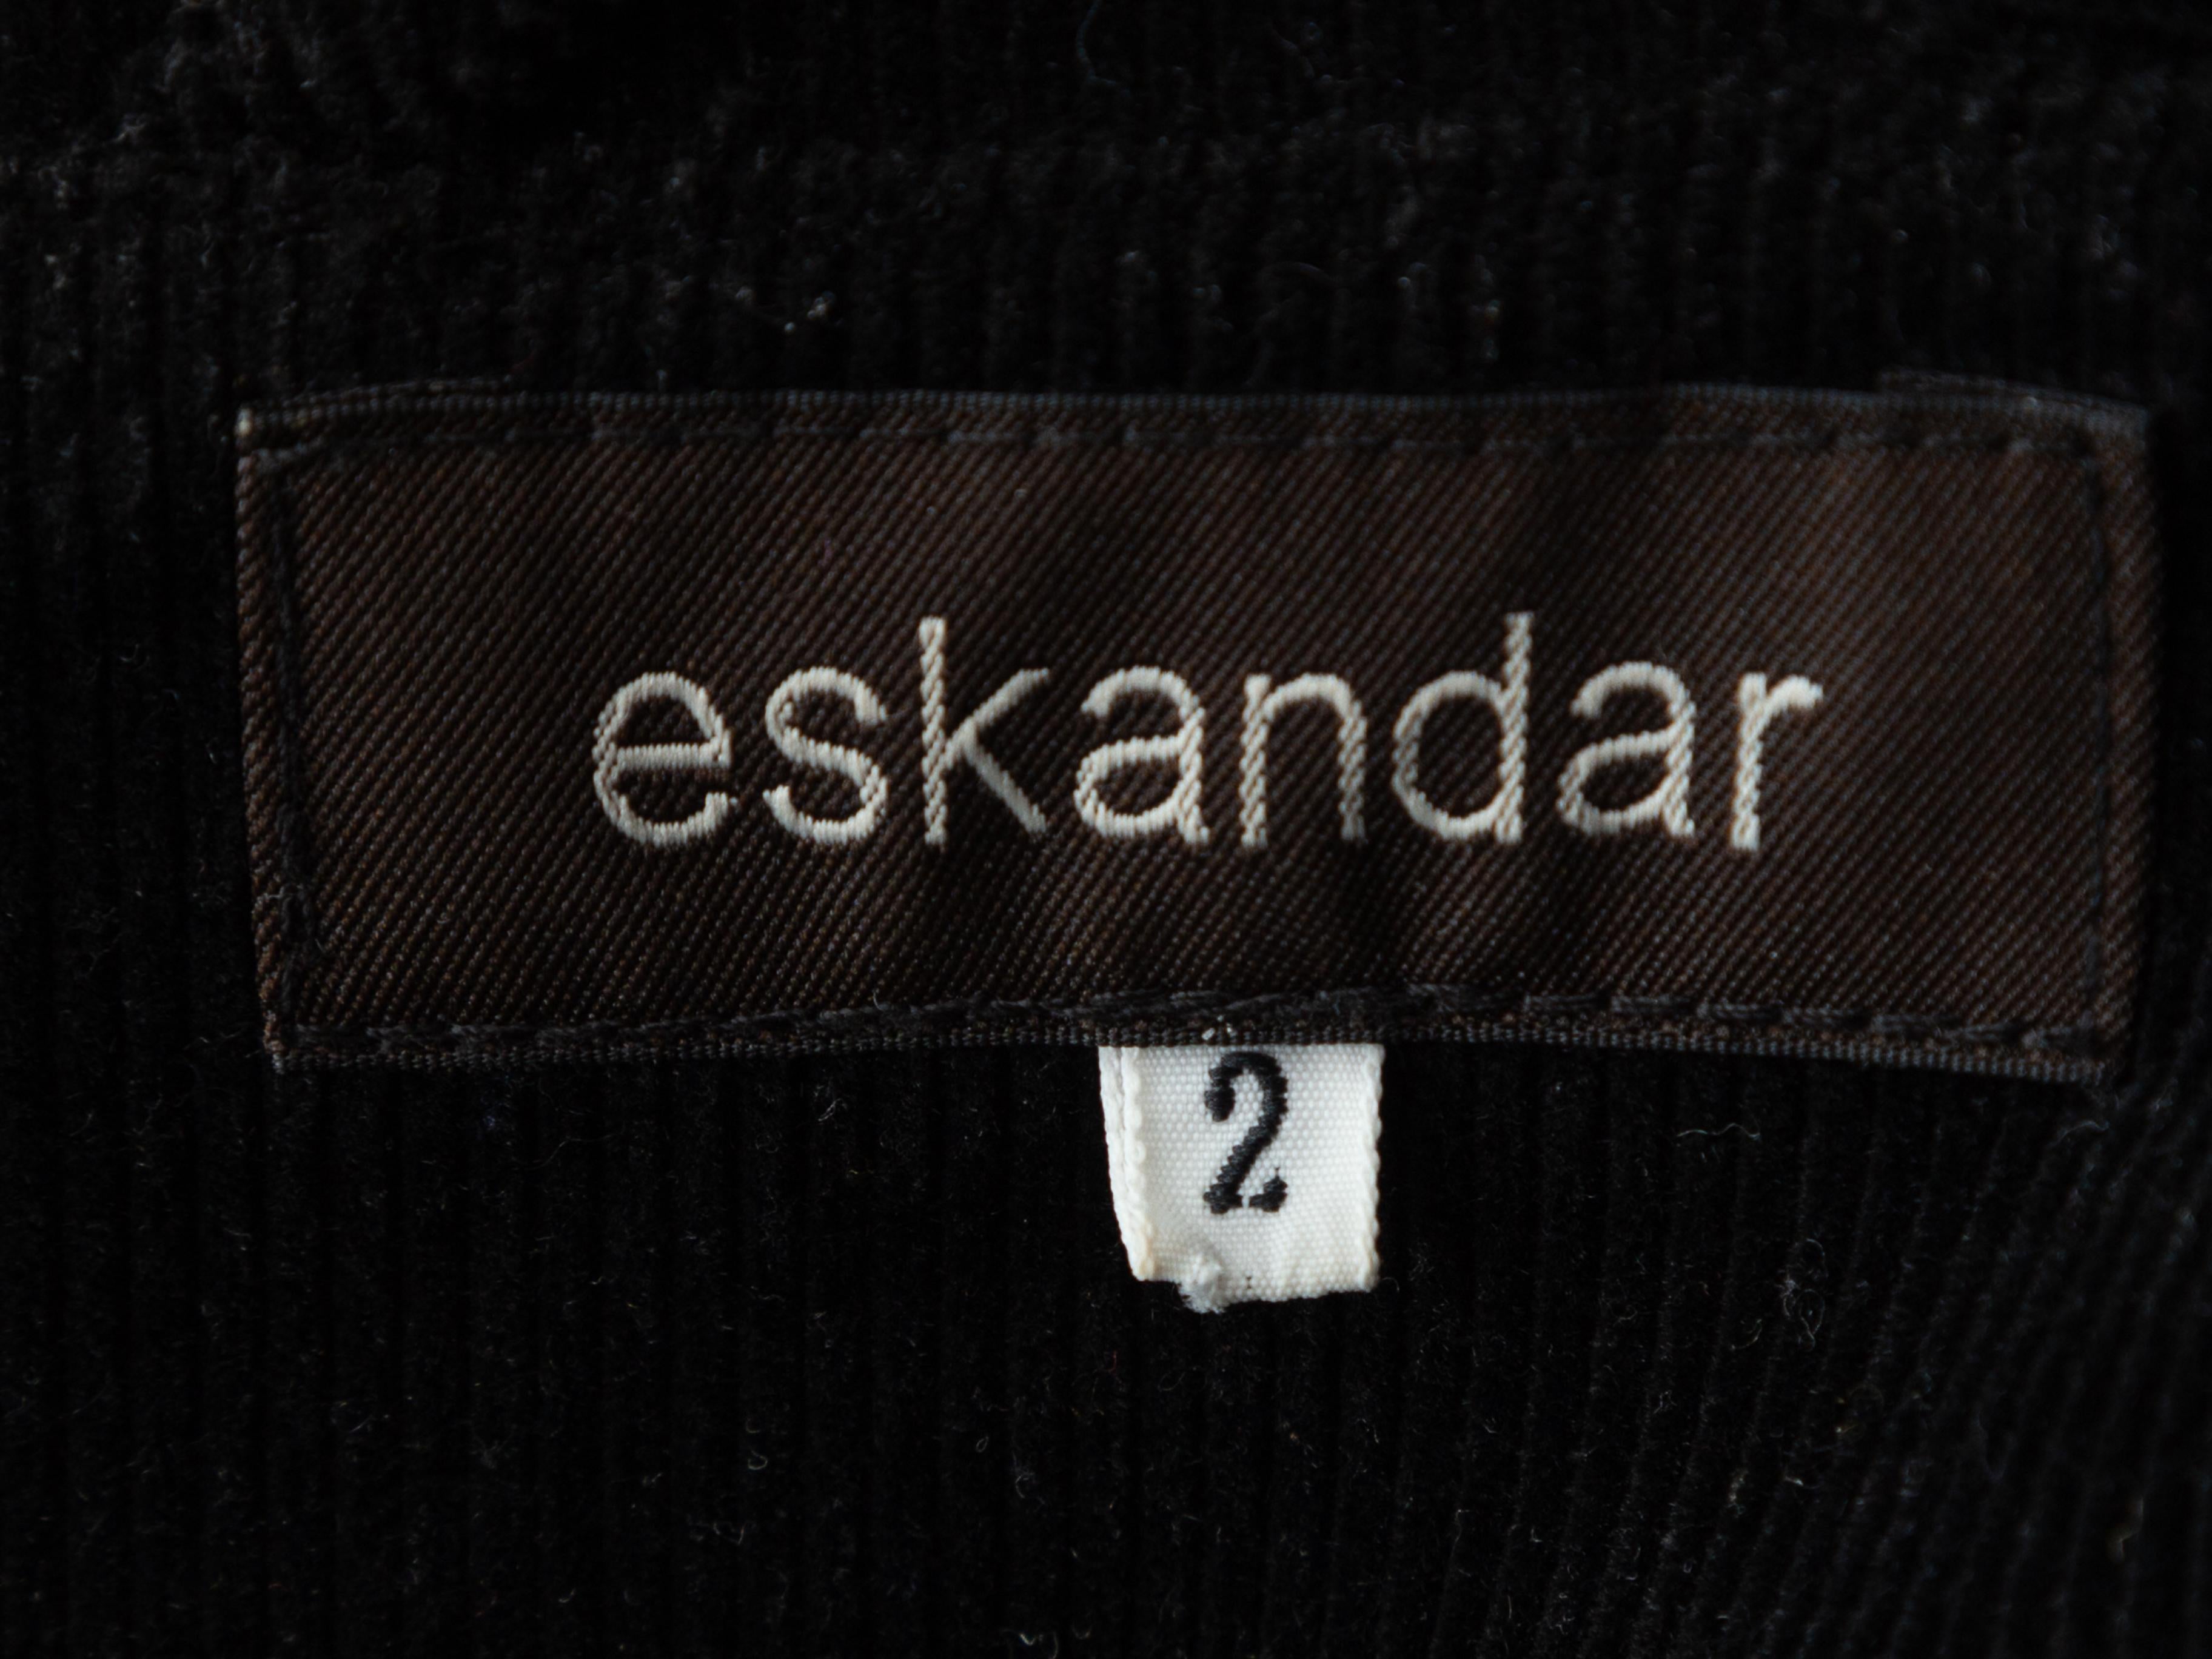 Product details: Black corduroy button-up jacket by Eskandar. Micro pointed collar. Dual patch pockets. Button closures at center front. 51